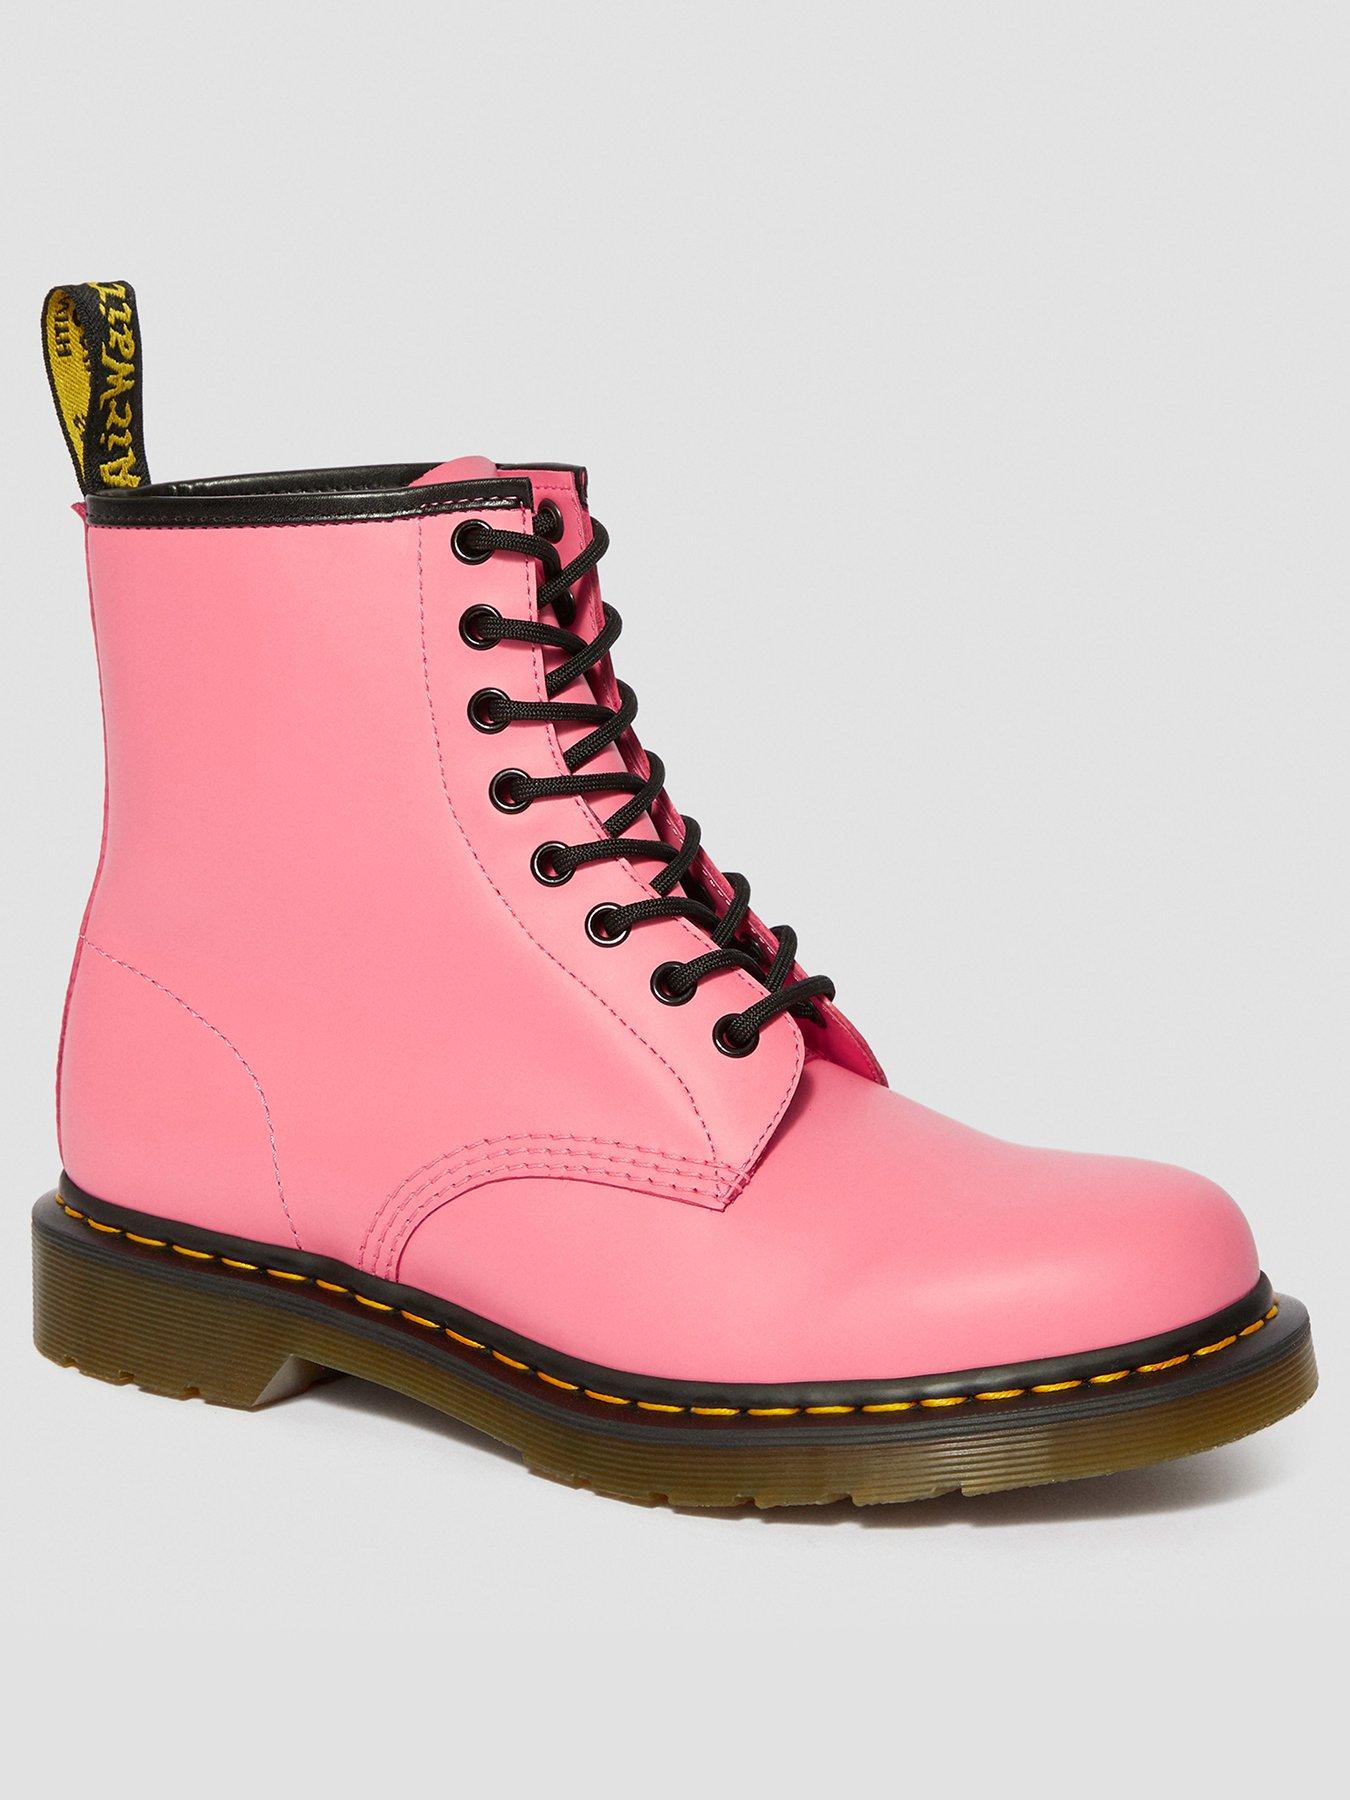 pink shoe boots uk